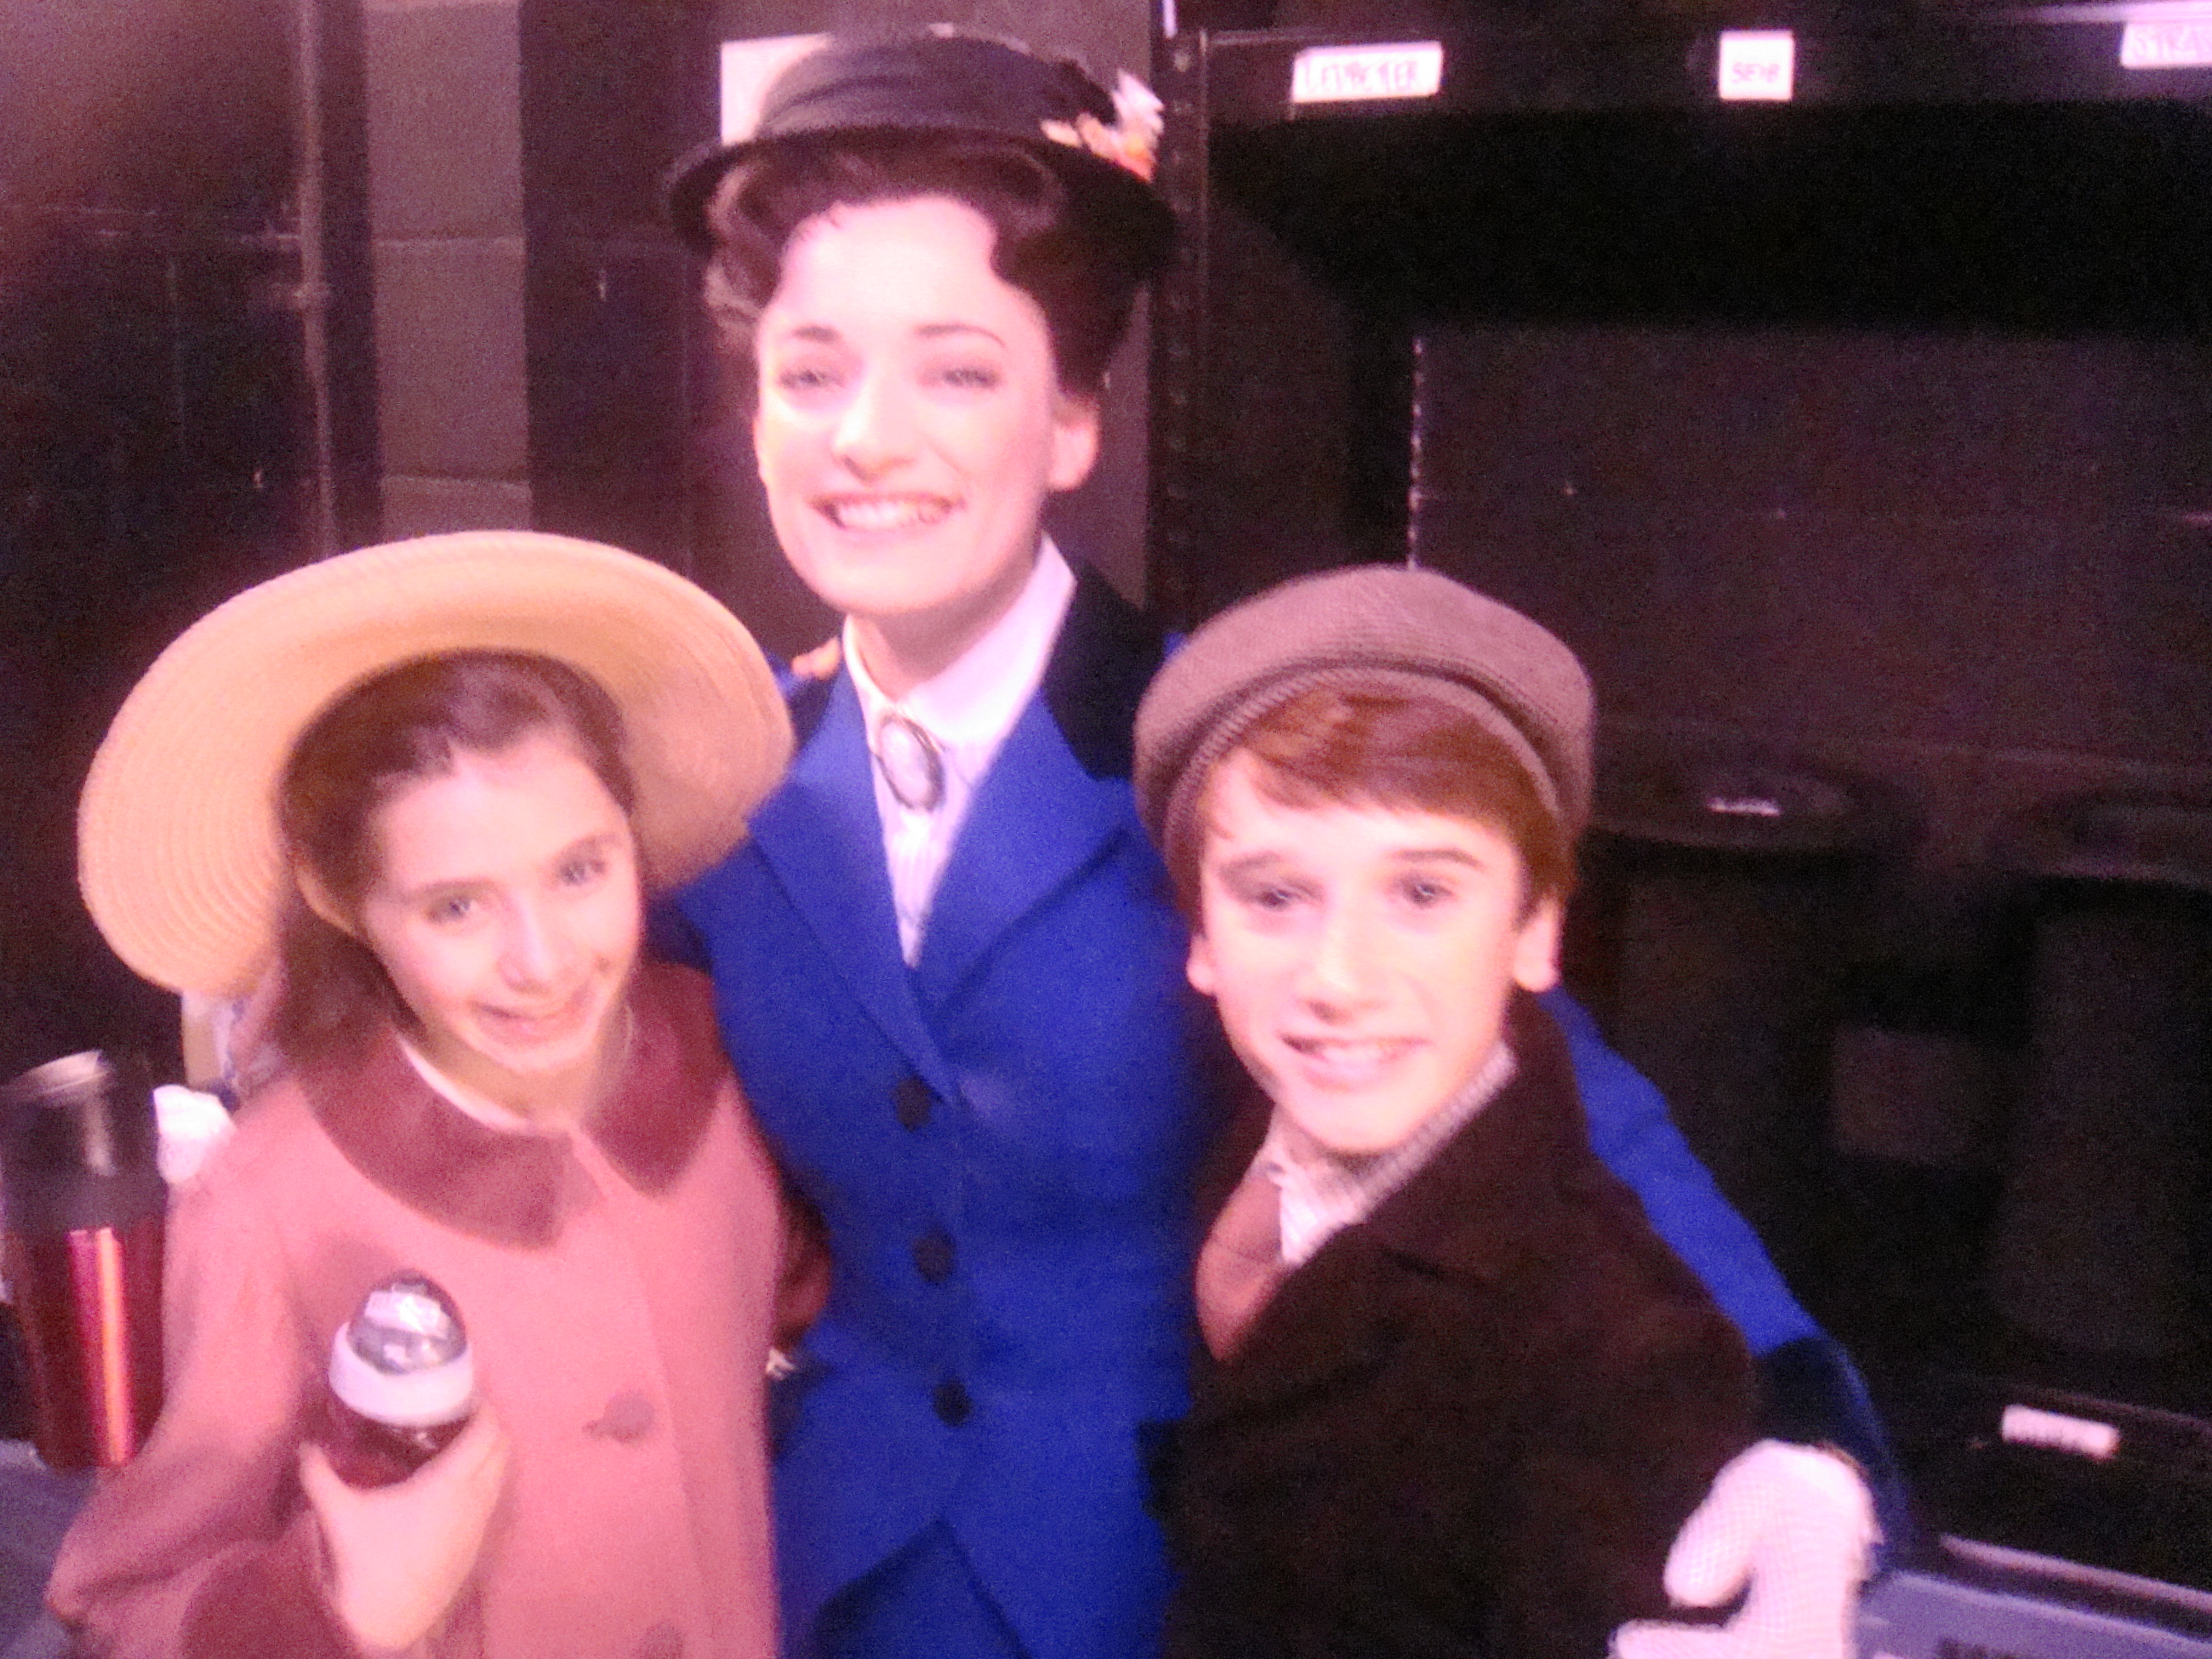 Rachel Resheff as Jane Banks in Mary Poppins on Broadway with Laura Michelle Kelly (Mary Poppins) 2010